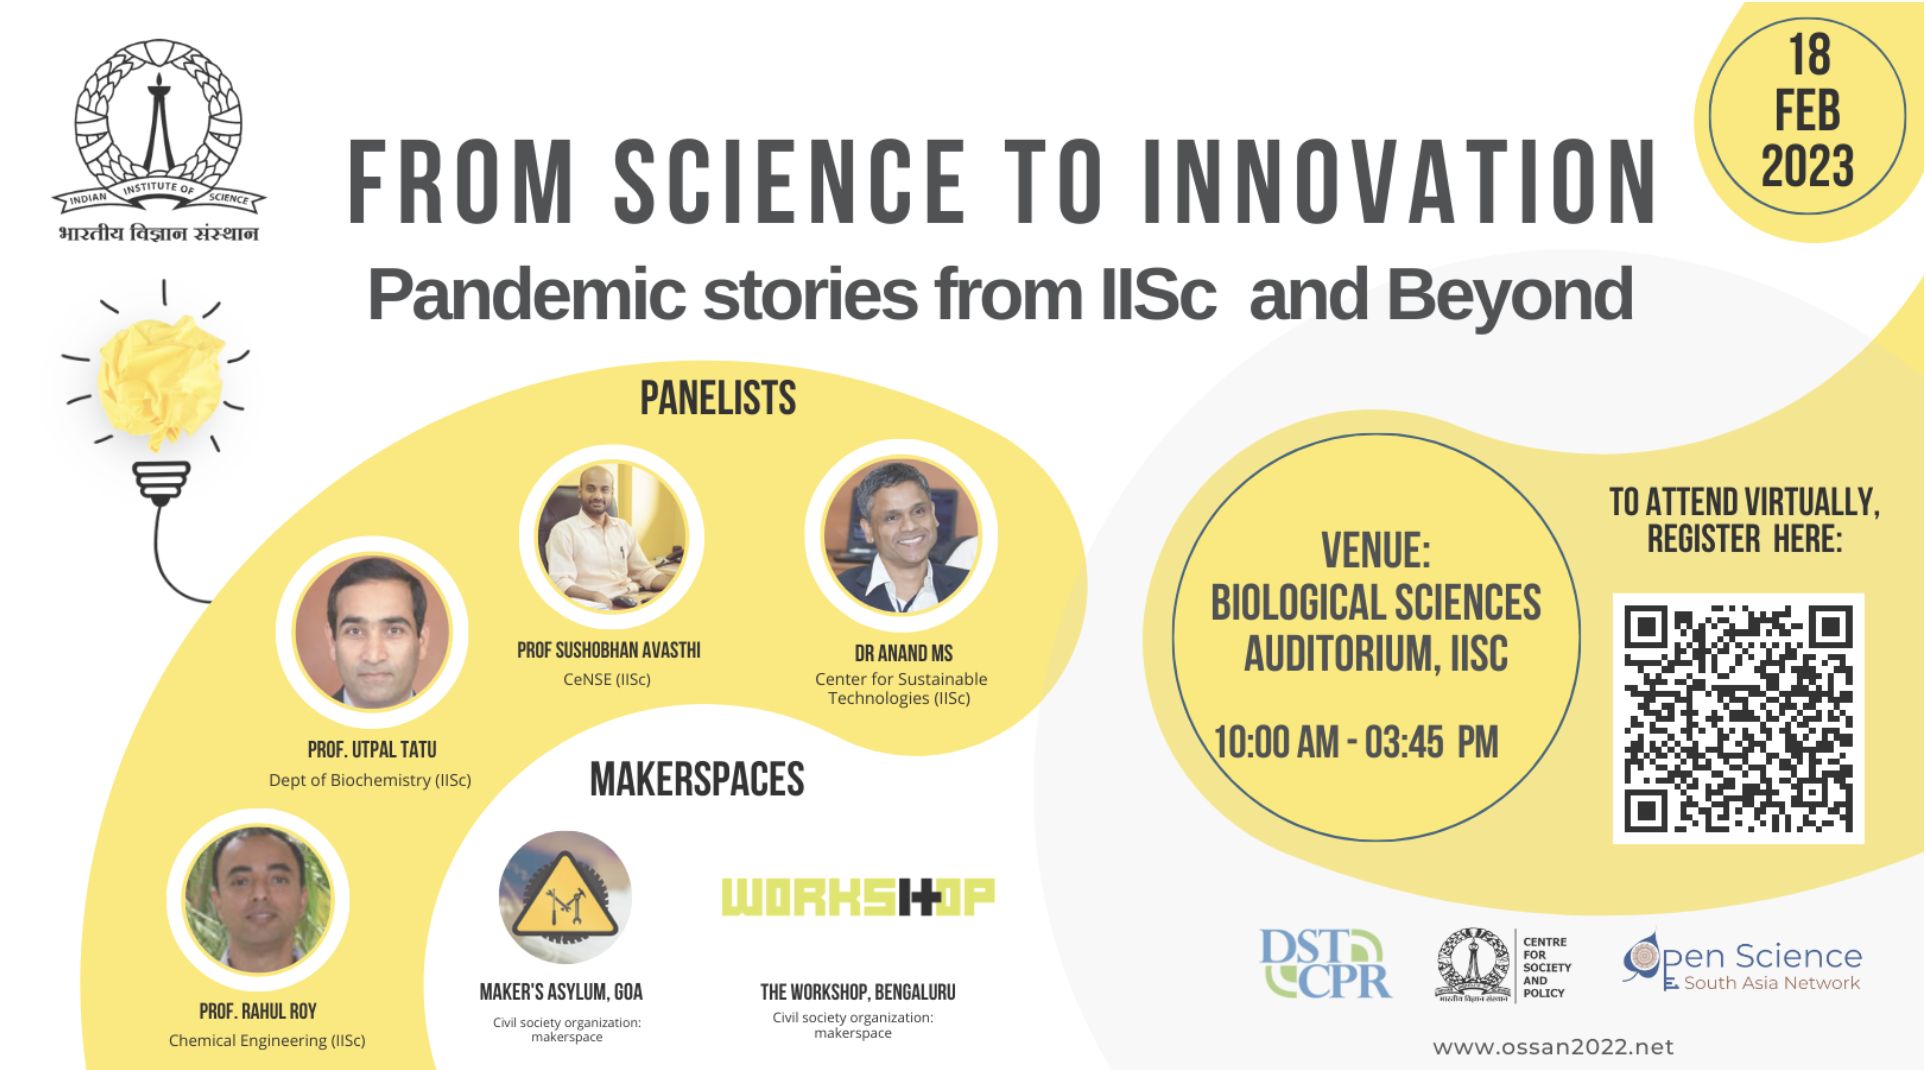 From Science to Innovation: Pandemic Stories from Science and Beyond